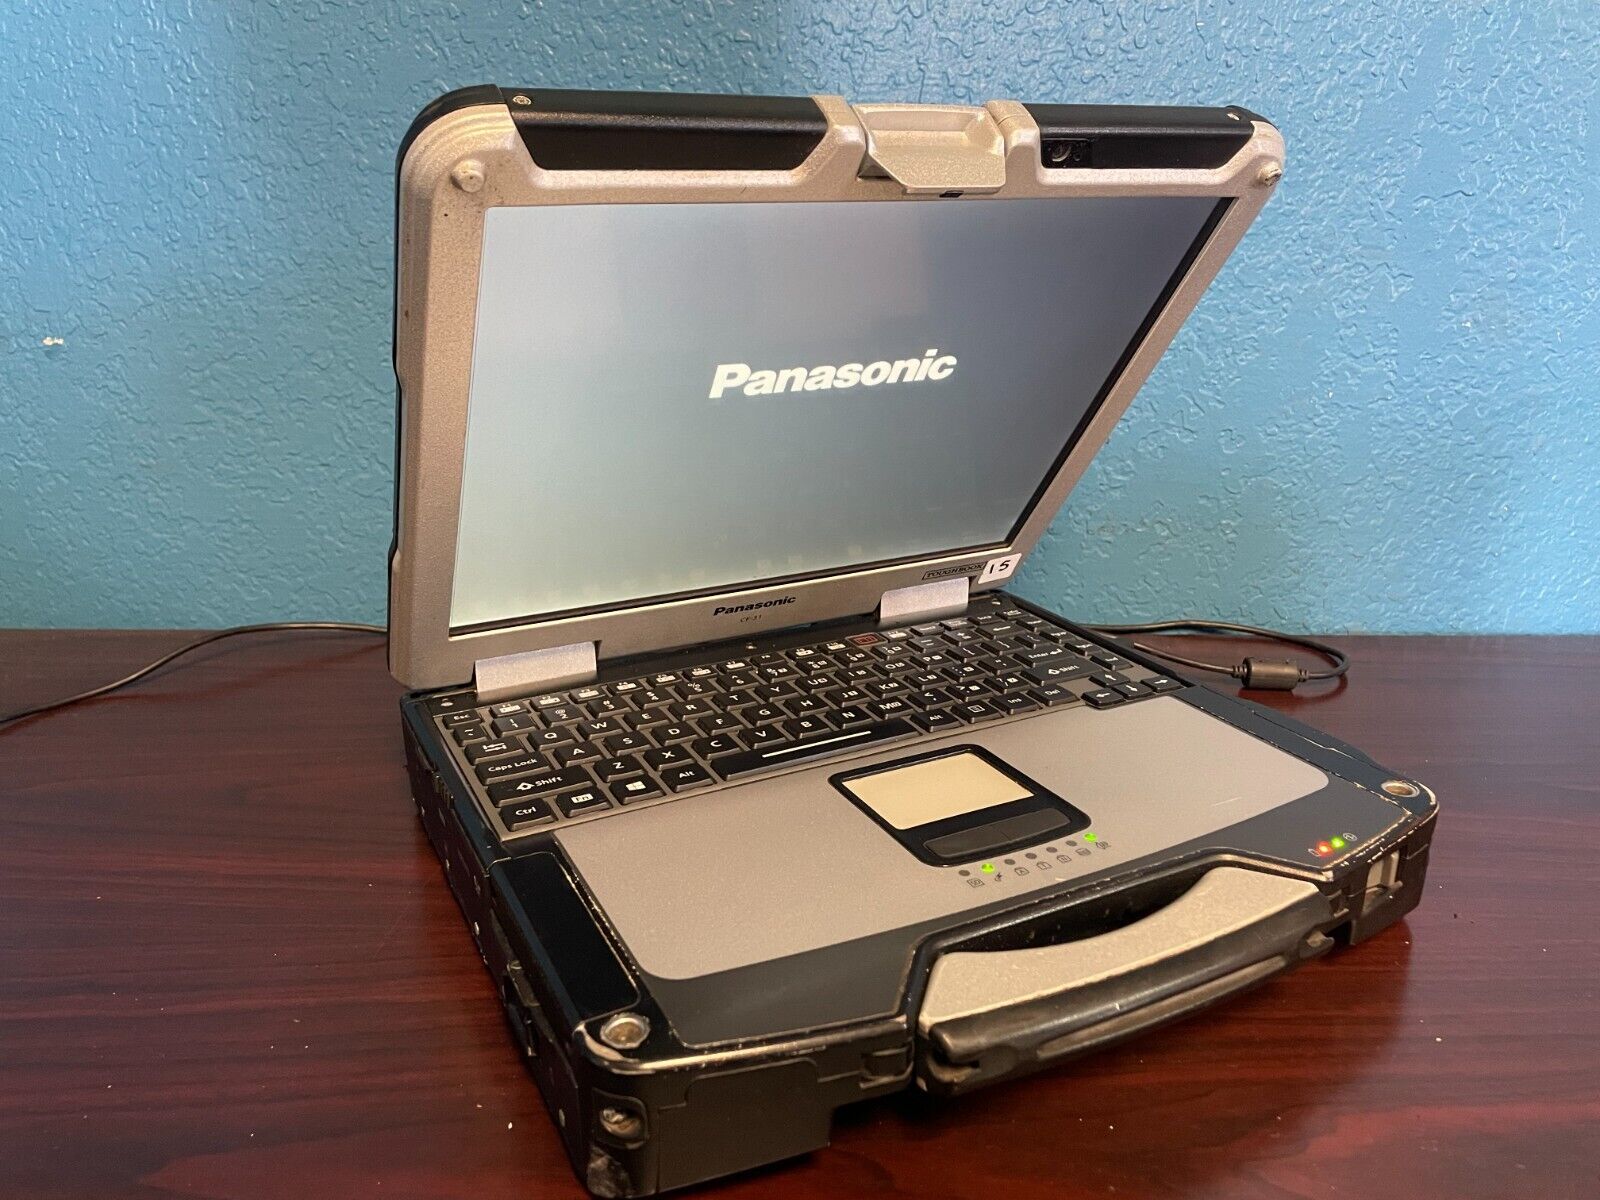 Panasonic Toughbook CF-31 Intel Core i5 3rd Gen - For parts sold as-is